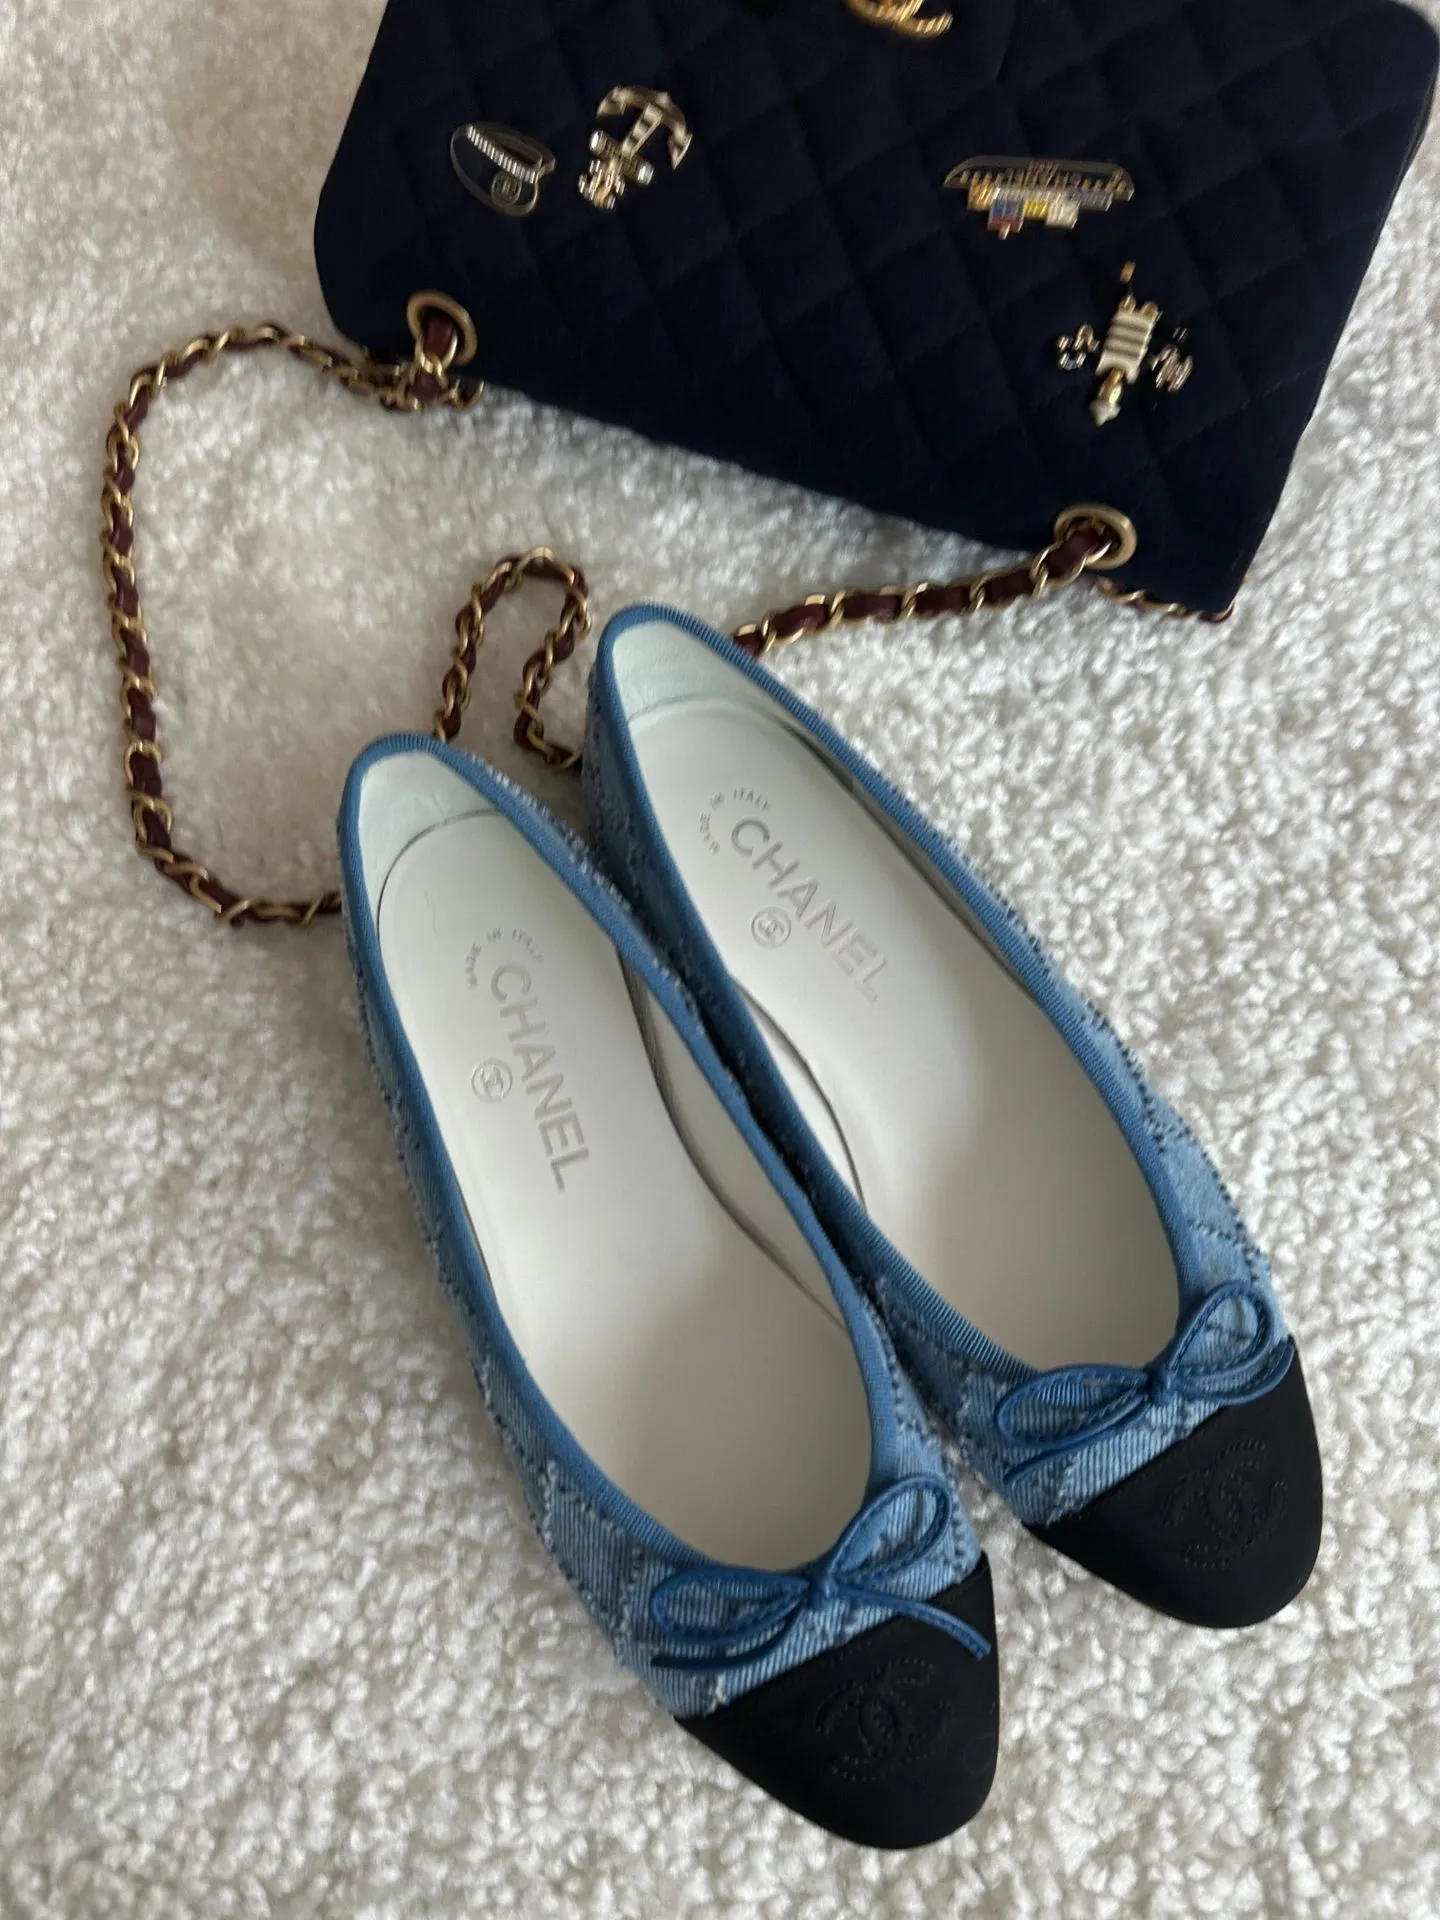 Chanel navy denim ballet flats with bow